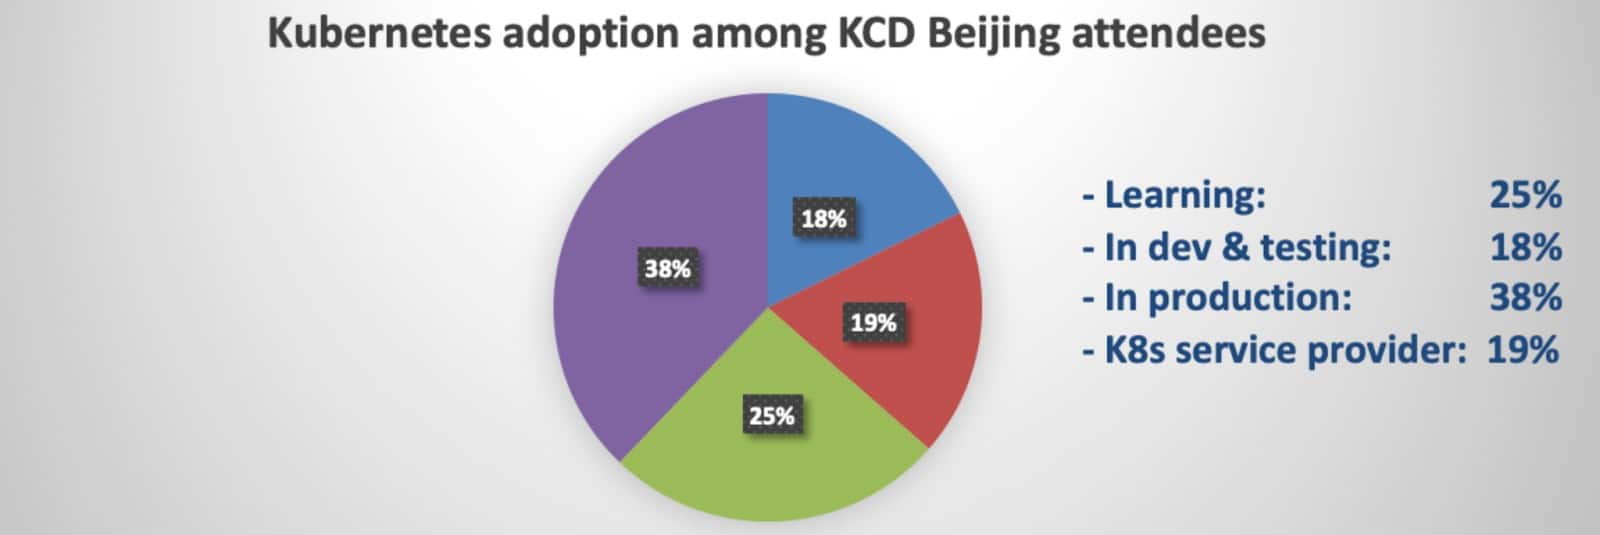 Round chart showing percentage of Kubernetes adoption among KCD Beijing attendees: 25% learning, 18% in dev & testing, 38% in production, and 19% k8s service provider